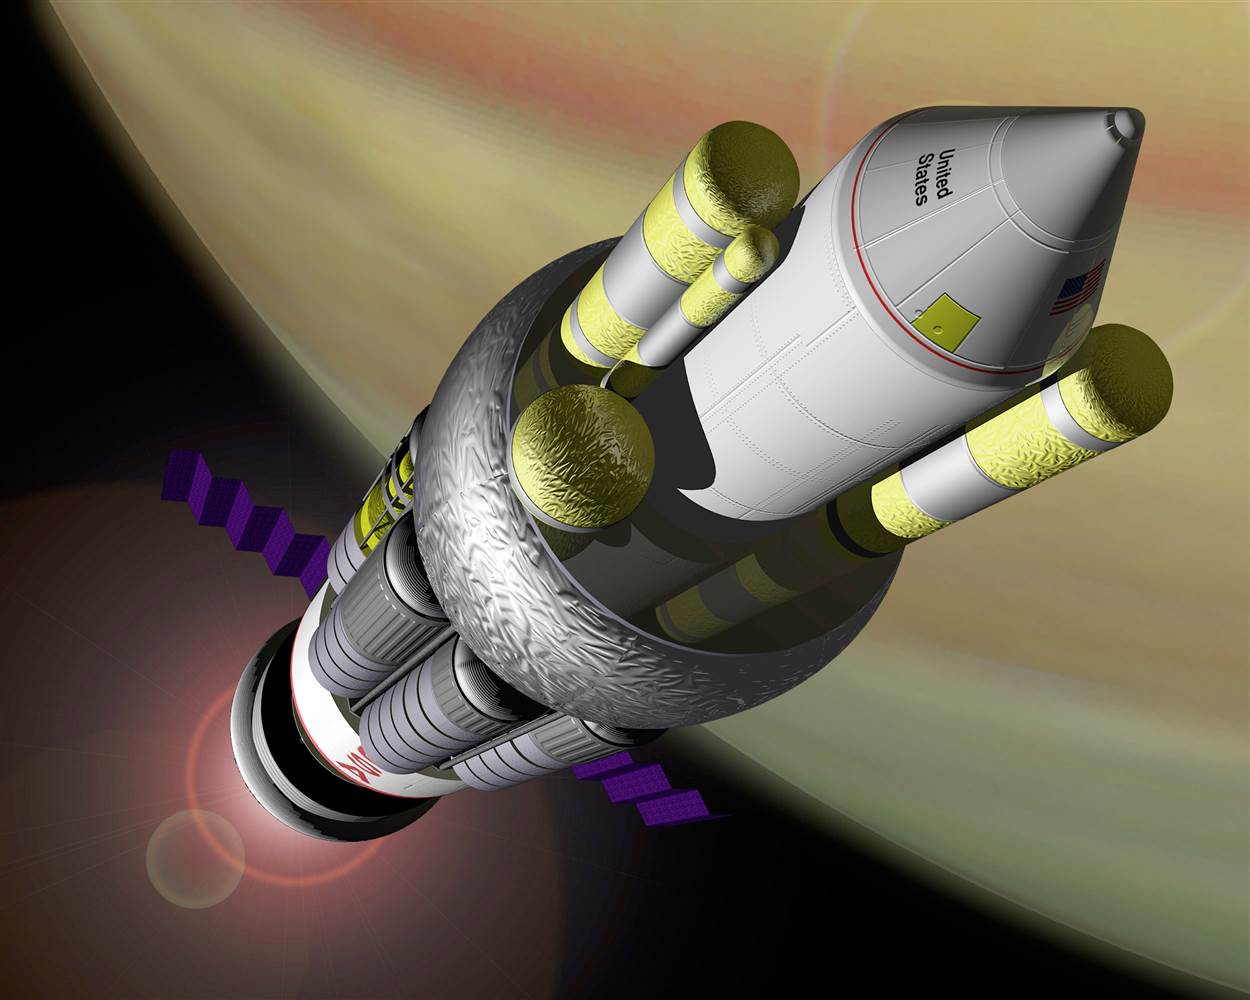 Illustration of Project ORION, a smaller version of the craft proposed by Freeman Dyson. NASA